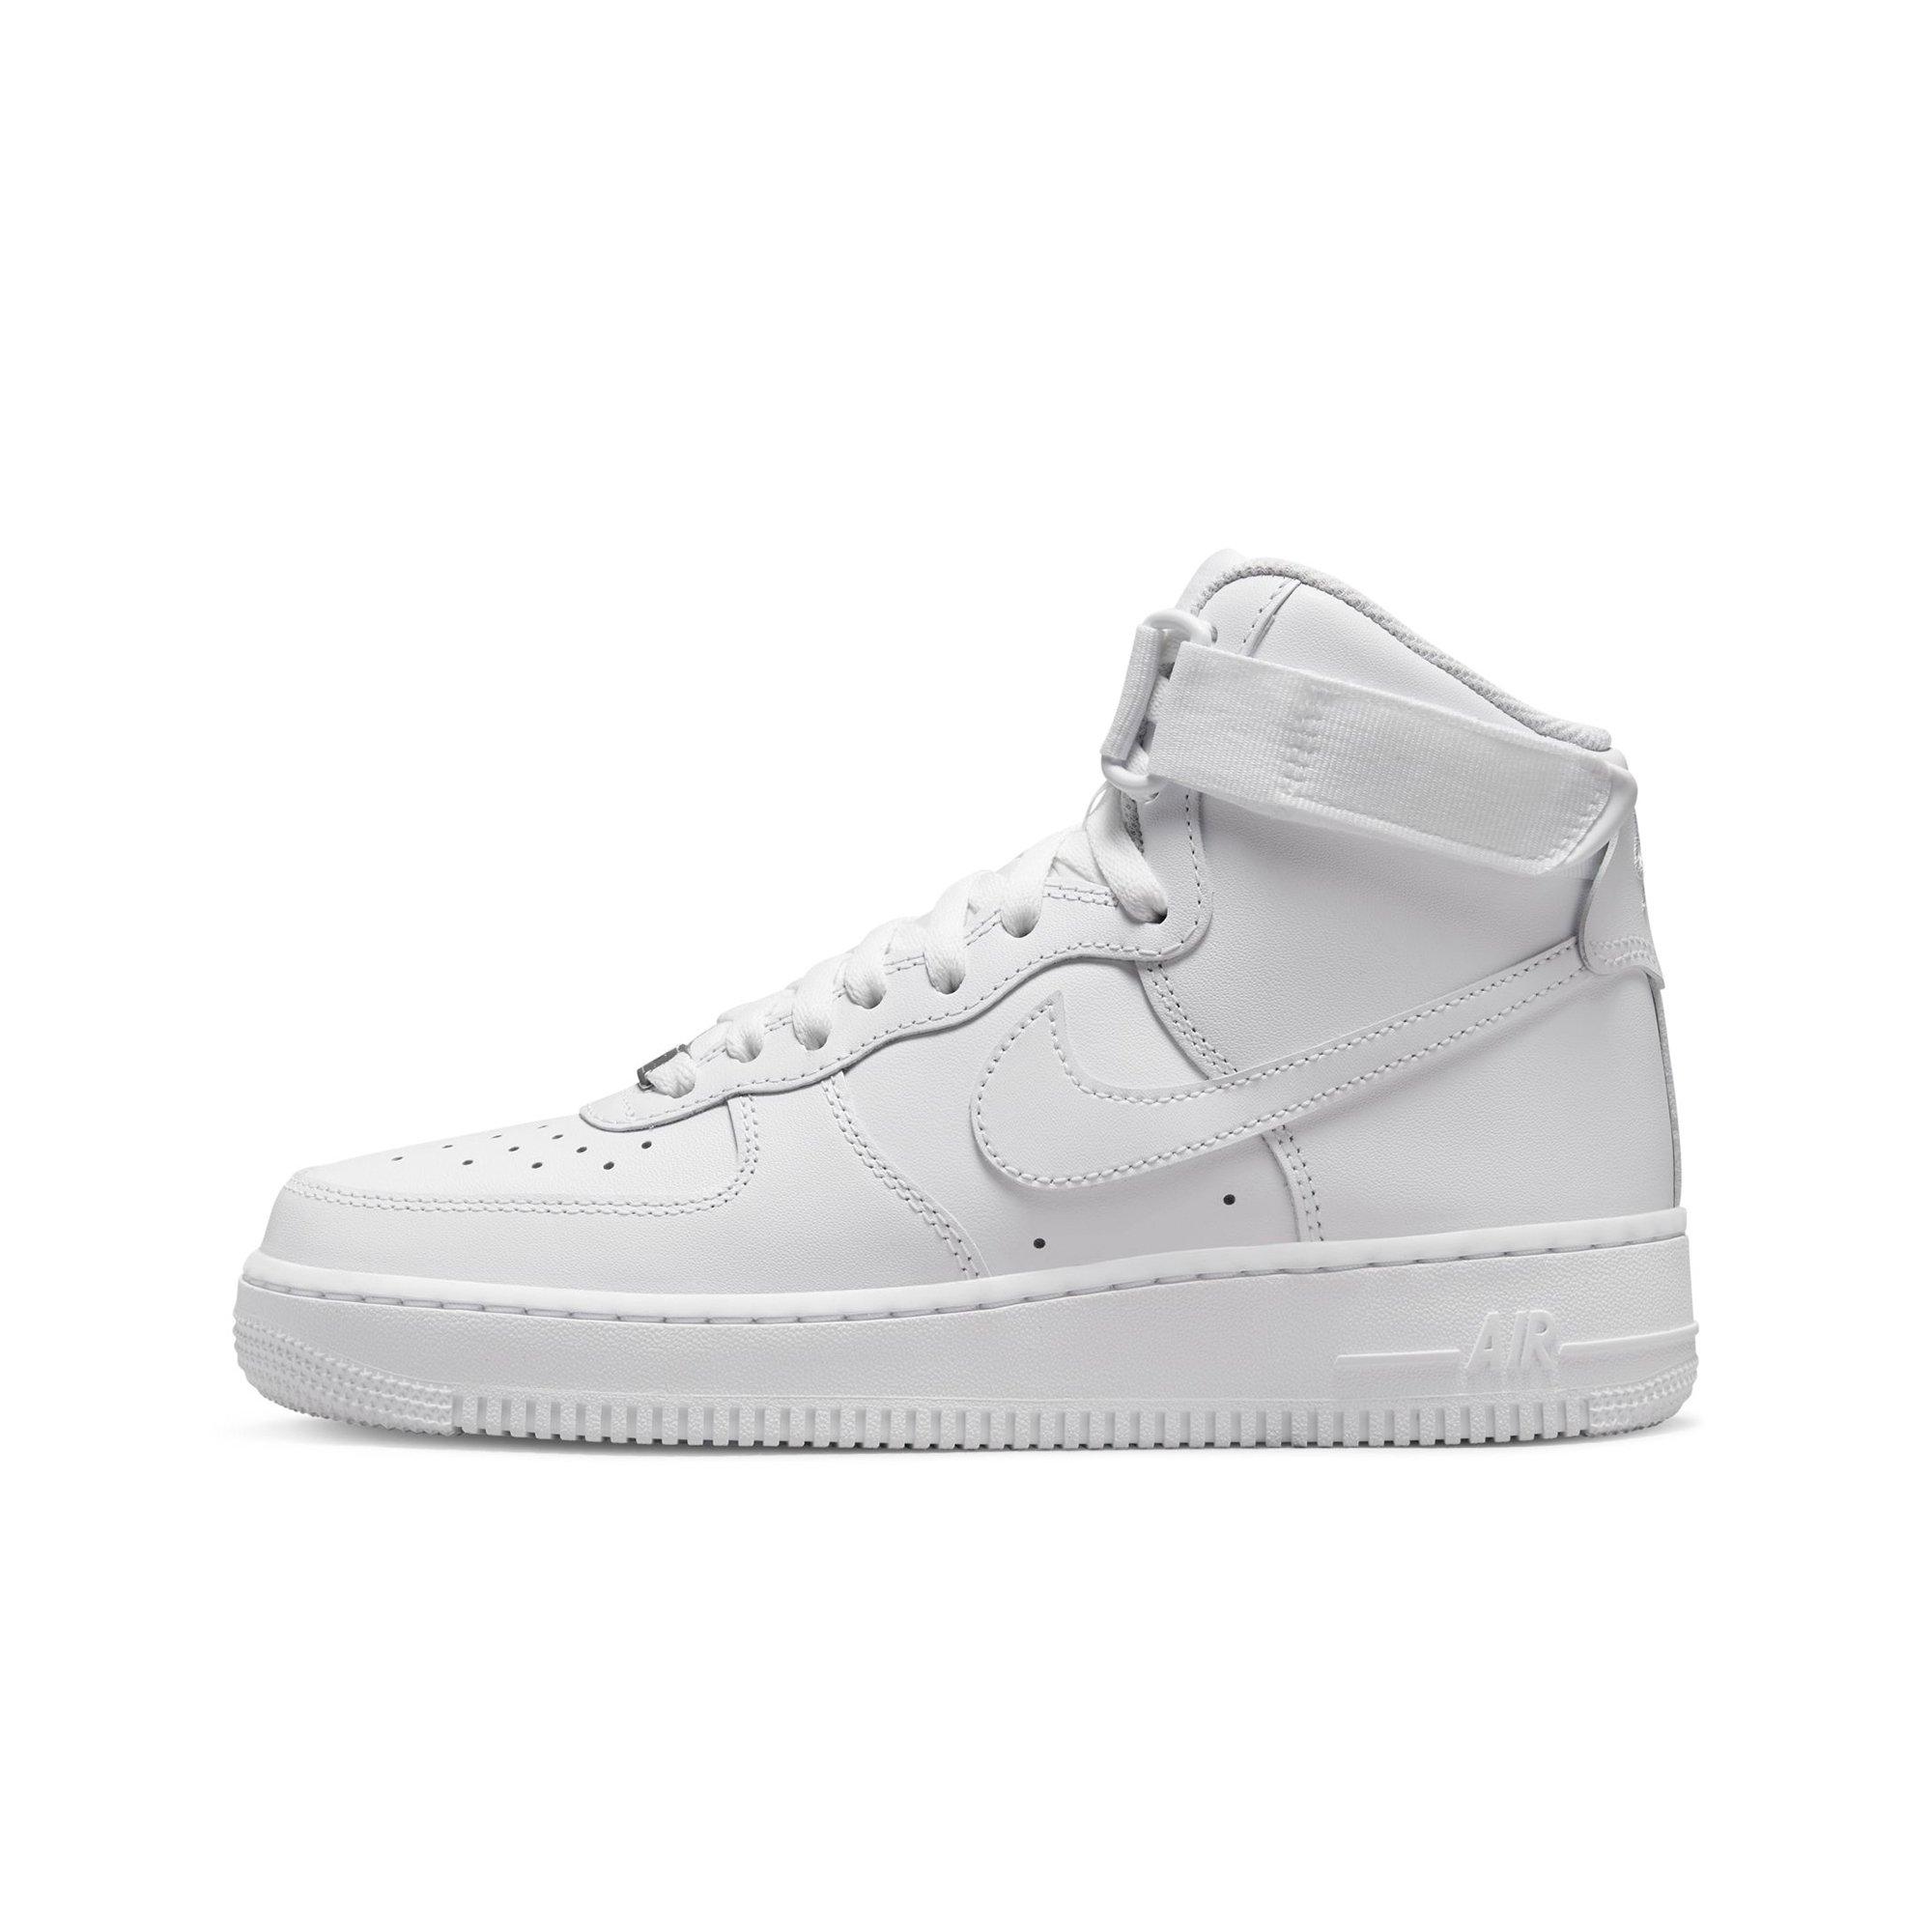 stoomboot Injectie Gezicht omhoog Nike Air Force 1 High "White/White" Women's Shoe